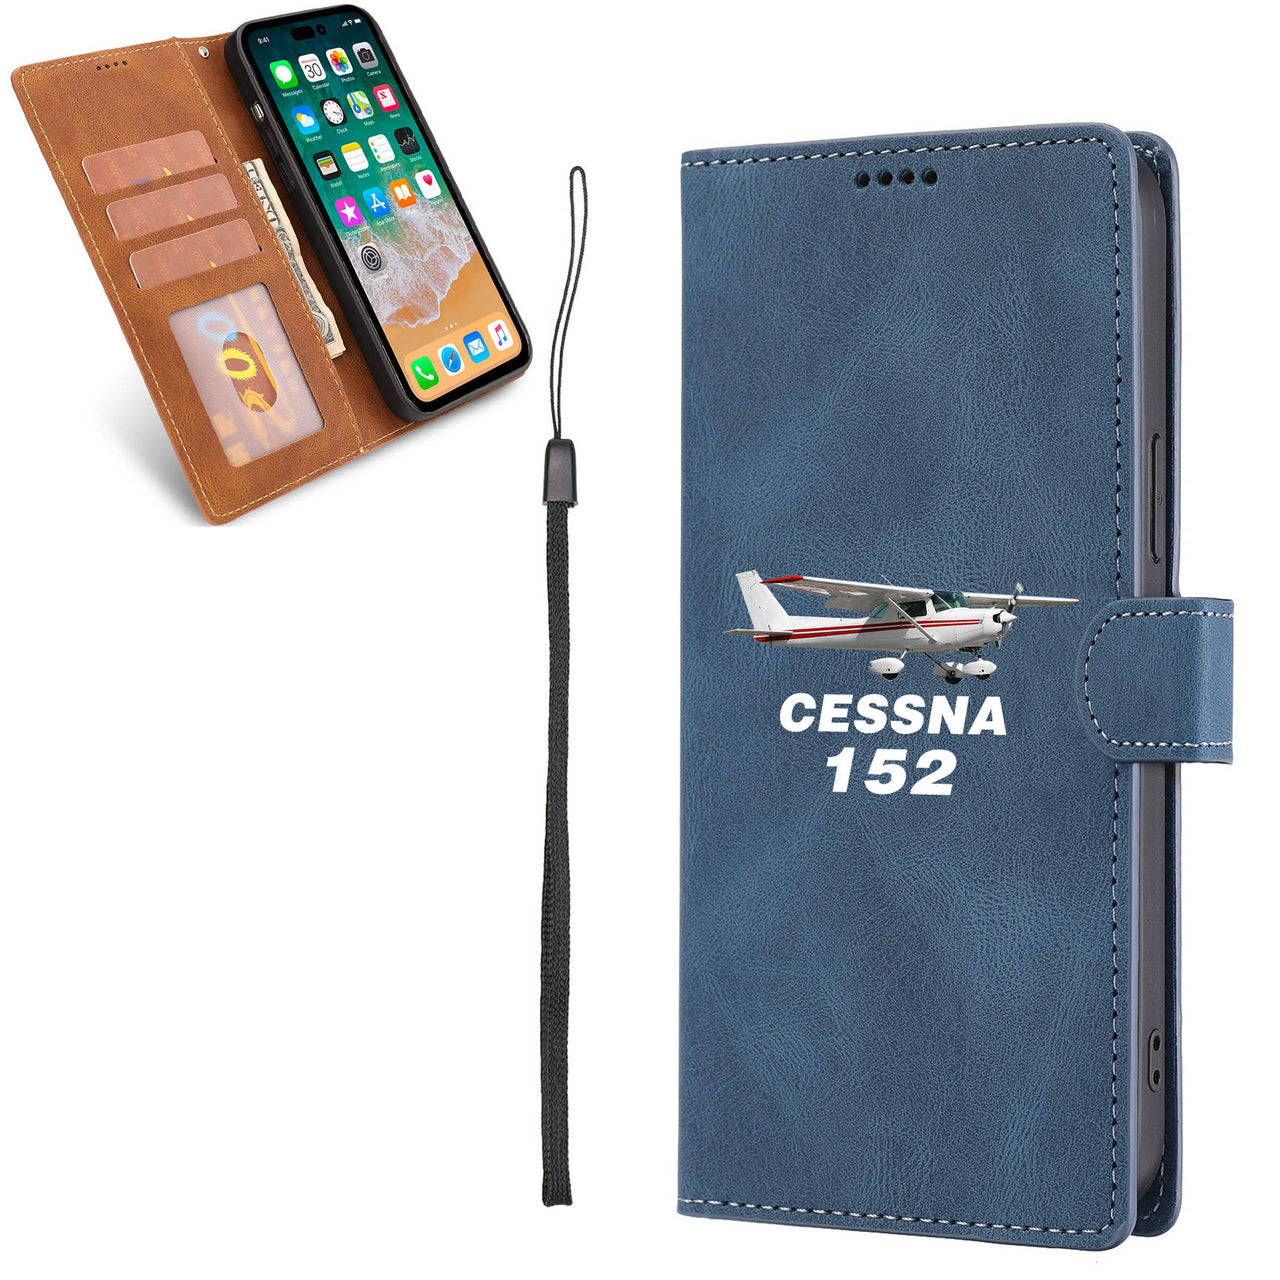 The Cessna 152 Designed Leather iPhone Cases